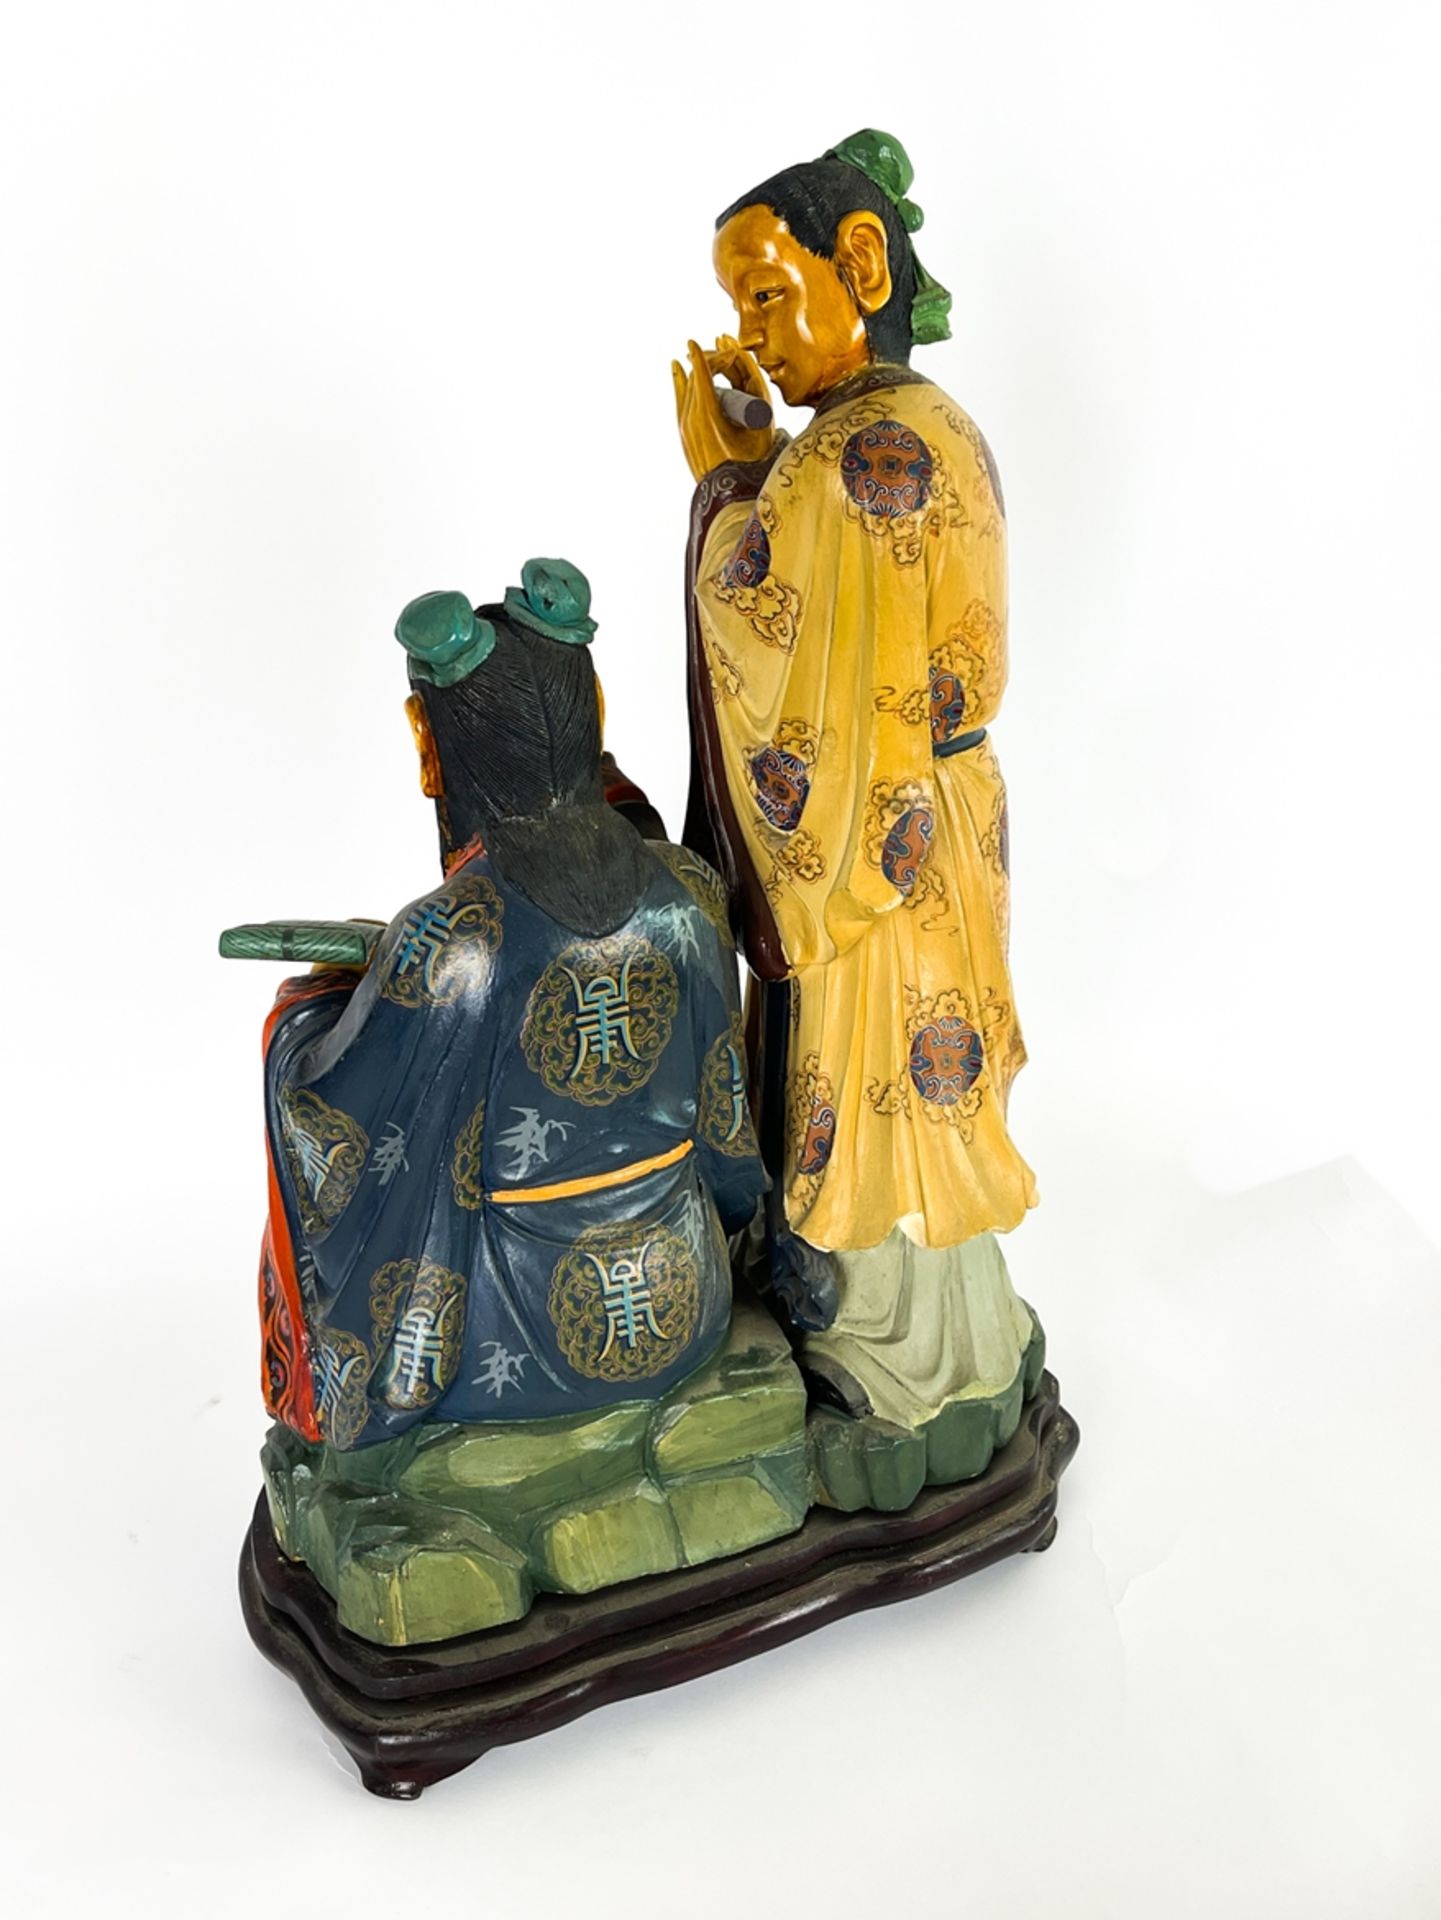 Chinese sculpture made from poplar wood and ivory - Image 10 of 13